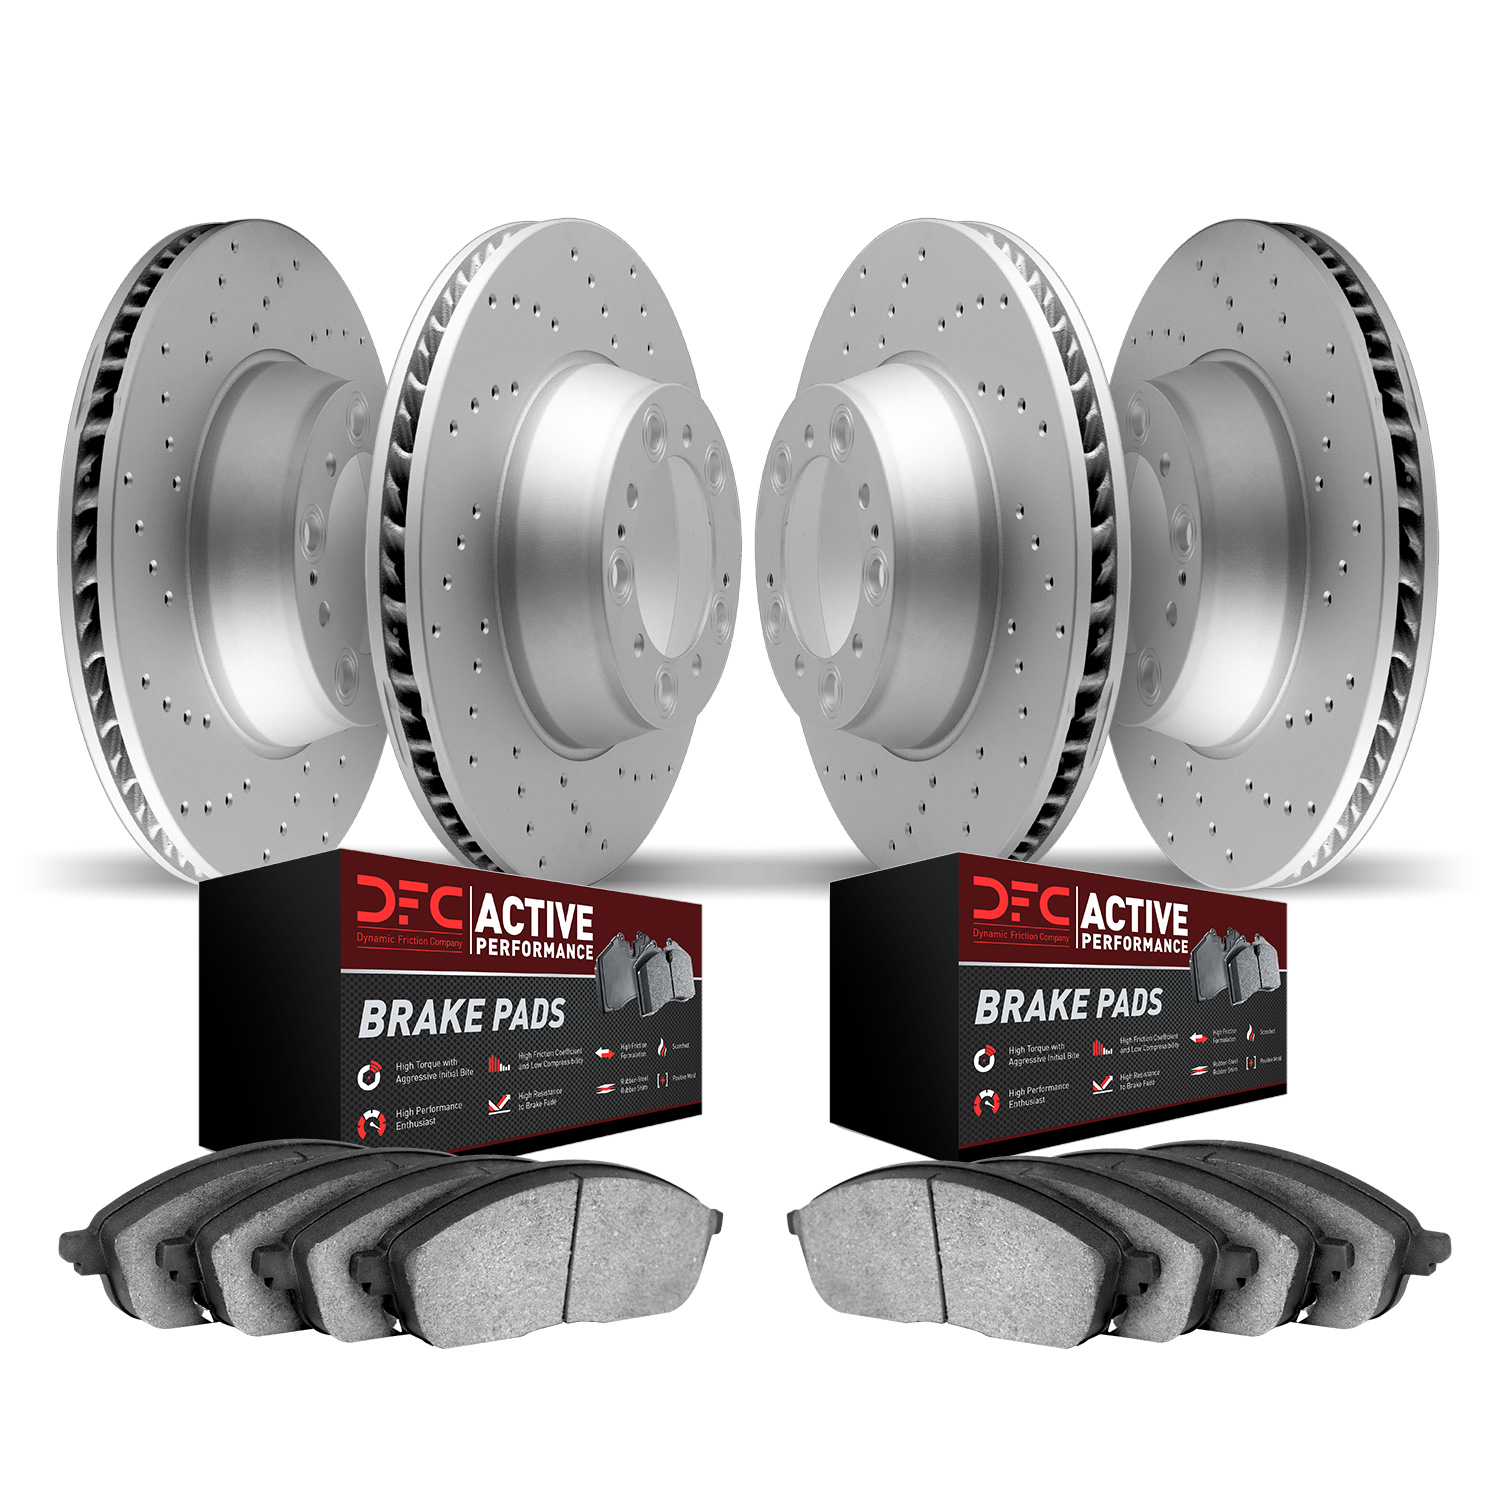 2704-31052 Geoperformance Drilled Brake Rotors with Active Performance Pads Kit, 2000-2003 BMW, Position: Front and Rear